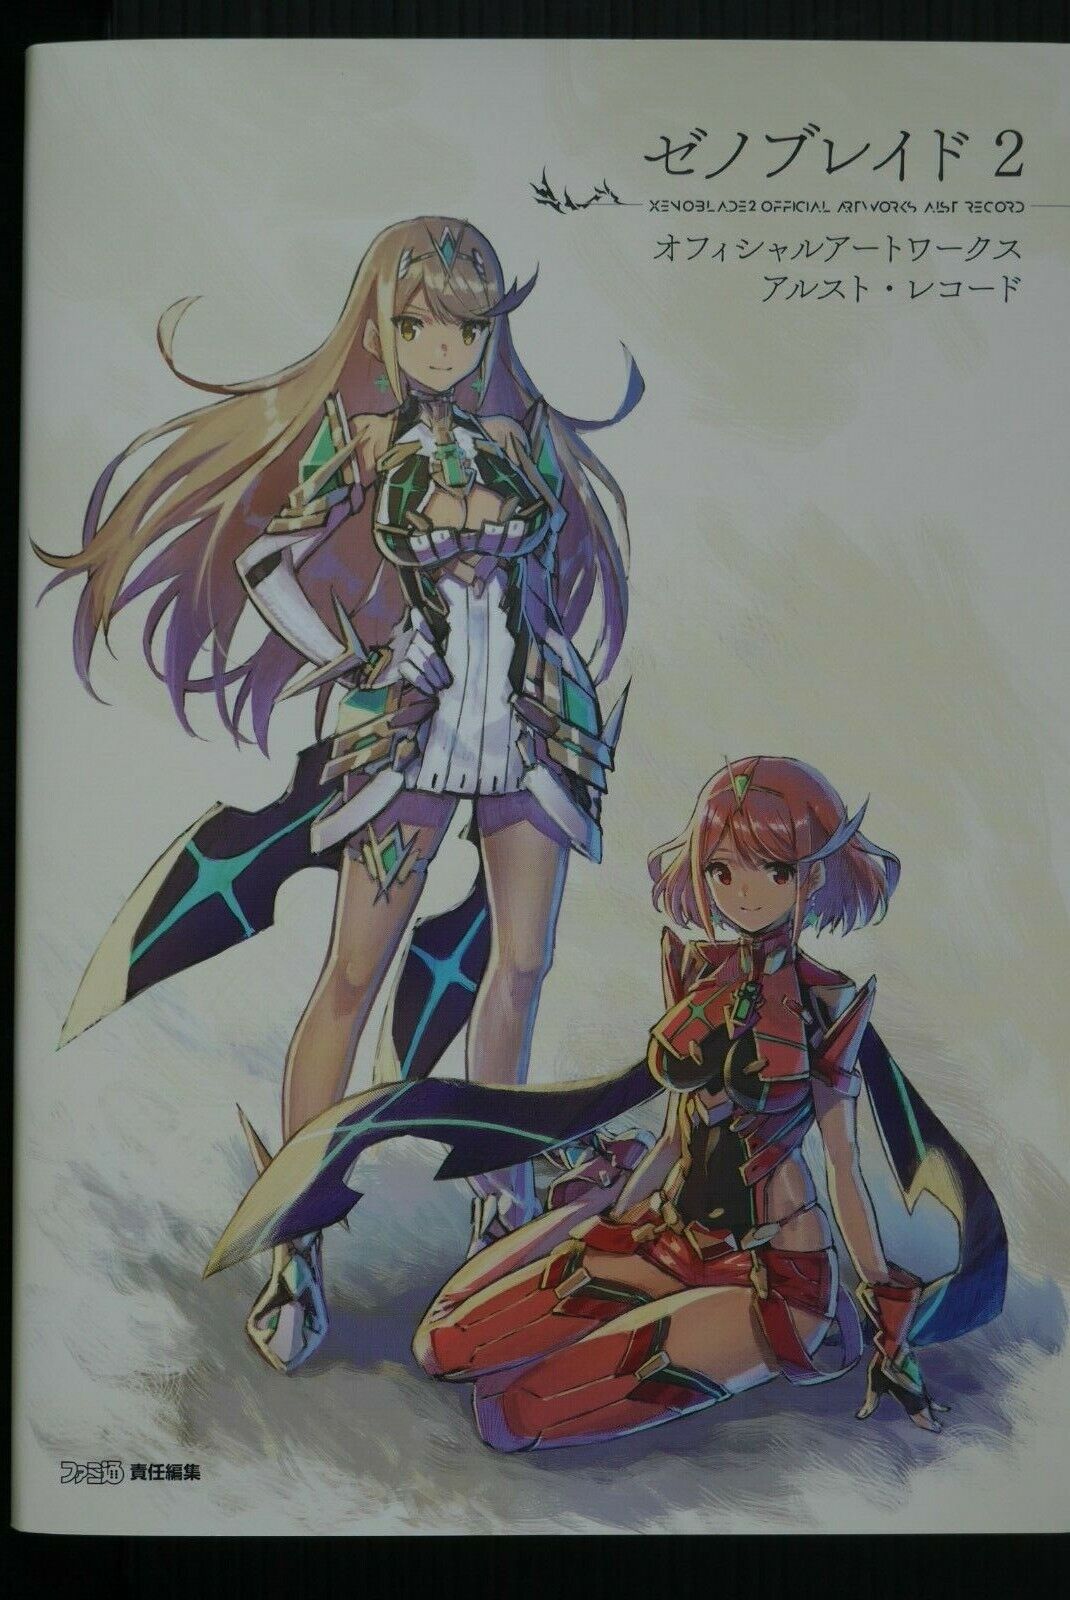 JAPAN Xenoblade Chronicles 2 Official Art Works Alst Record (Art Book)